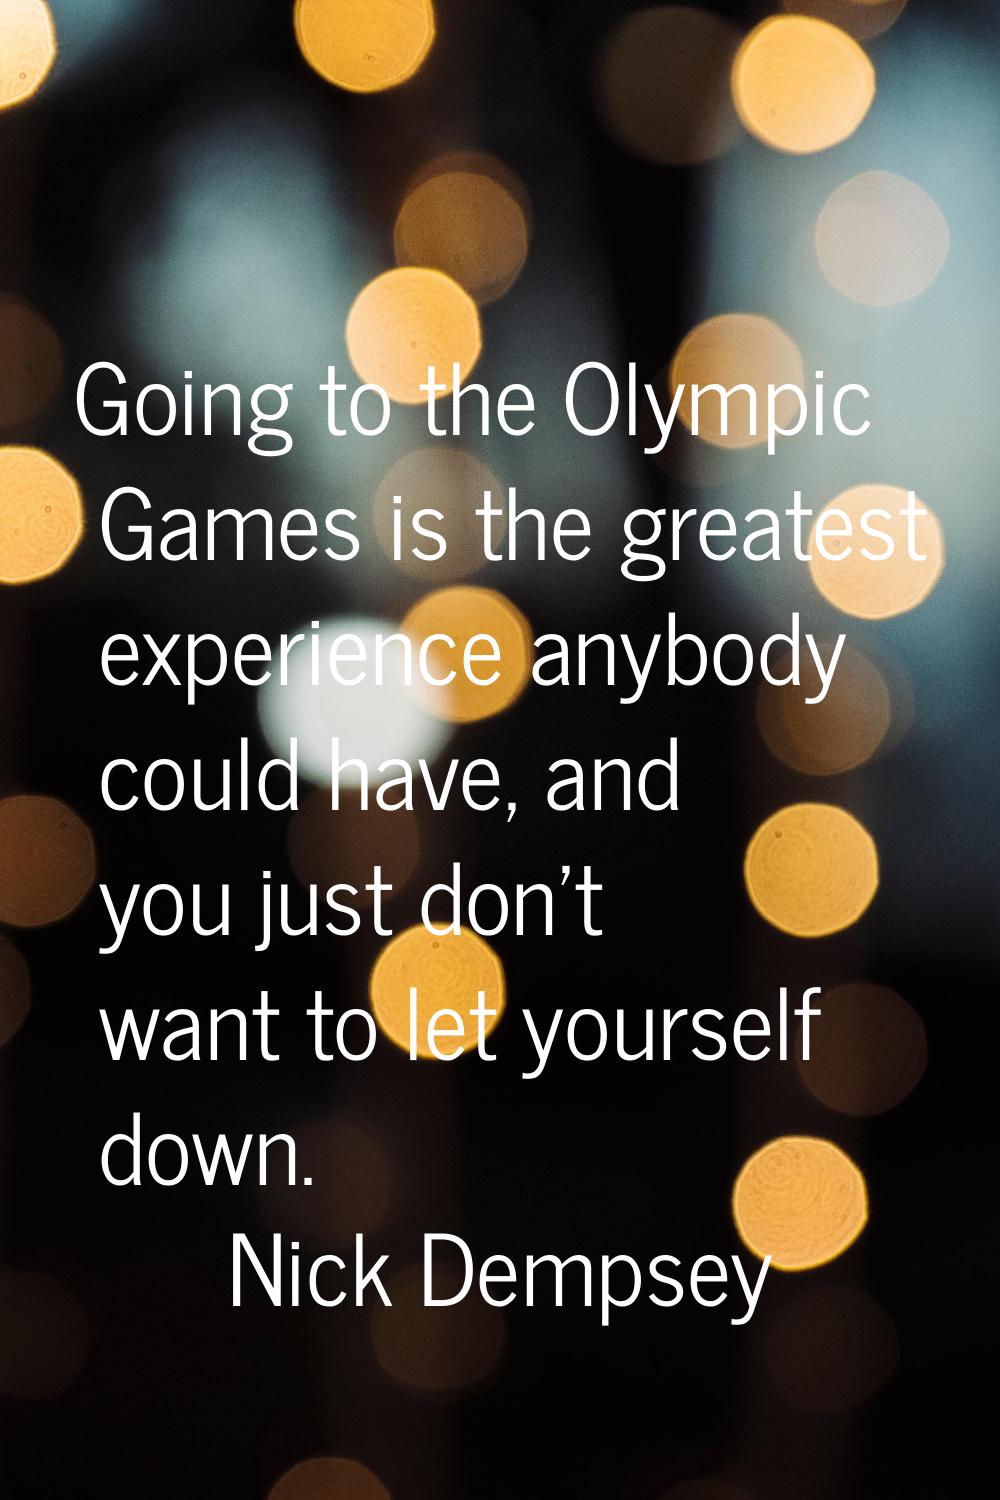 Going to the Olympic Games is the greatest experience anybody could have, and you just don't want t